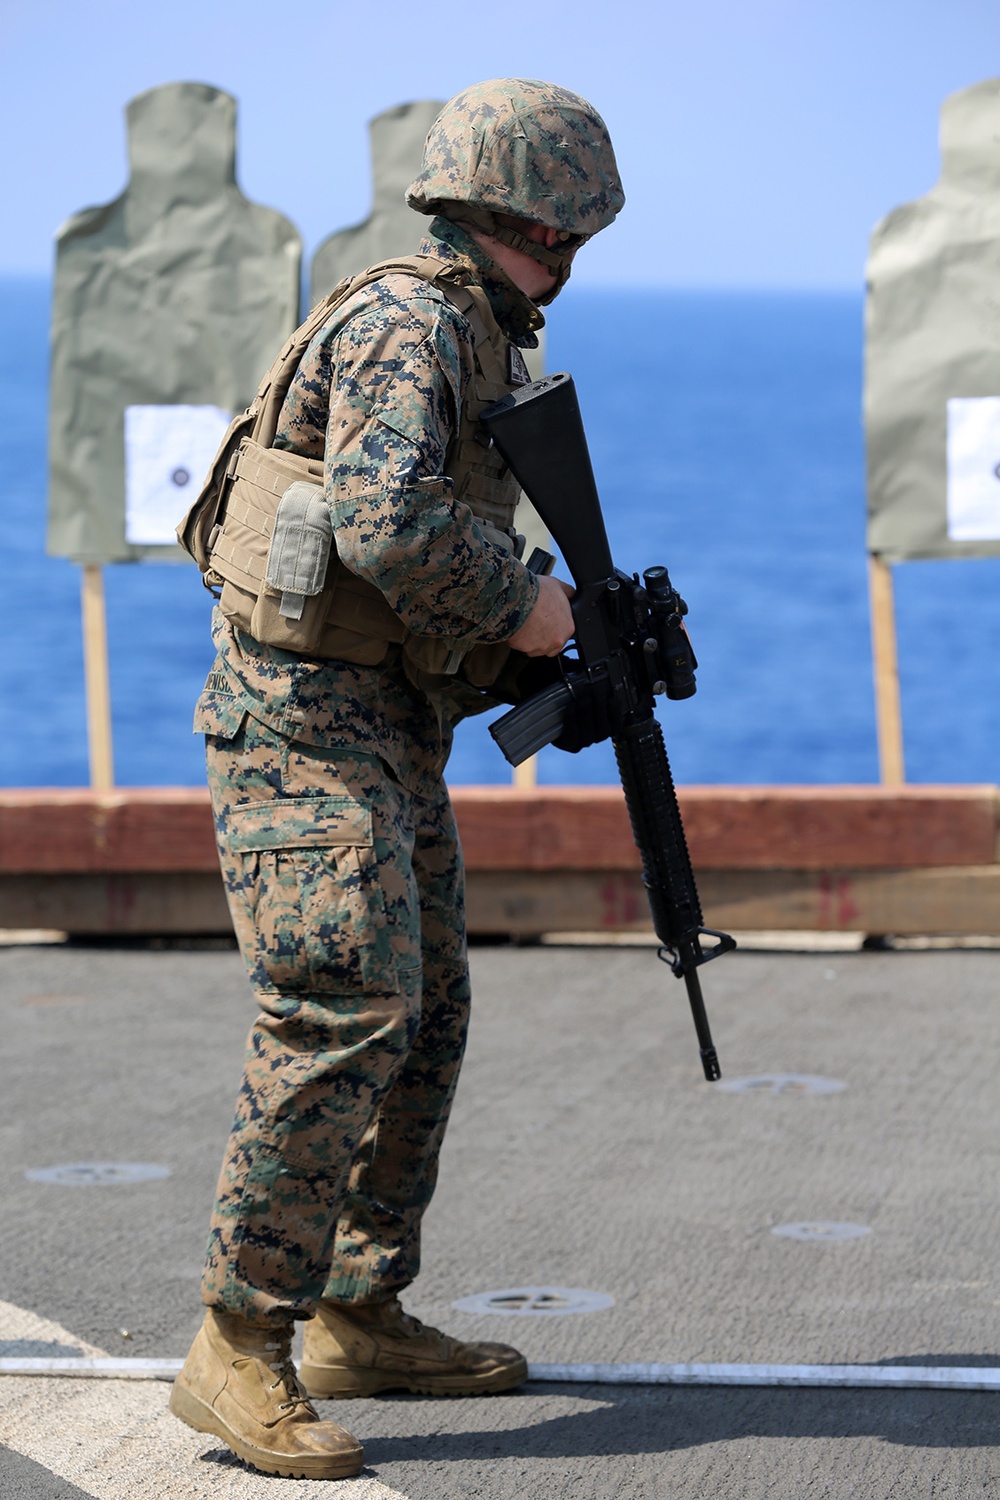 CLB-11 maintains weapon proficiency on USS Comstock